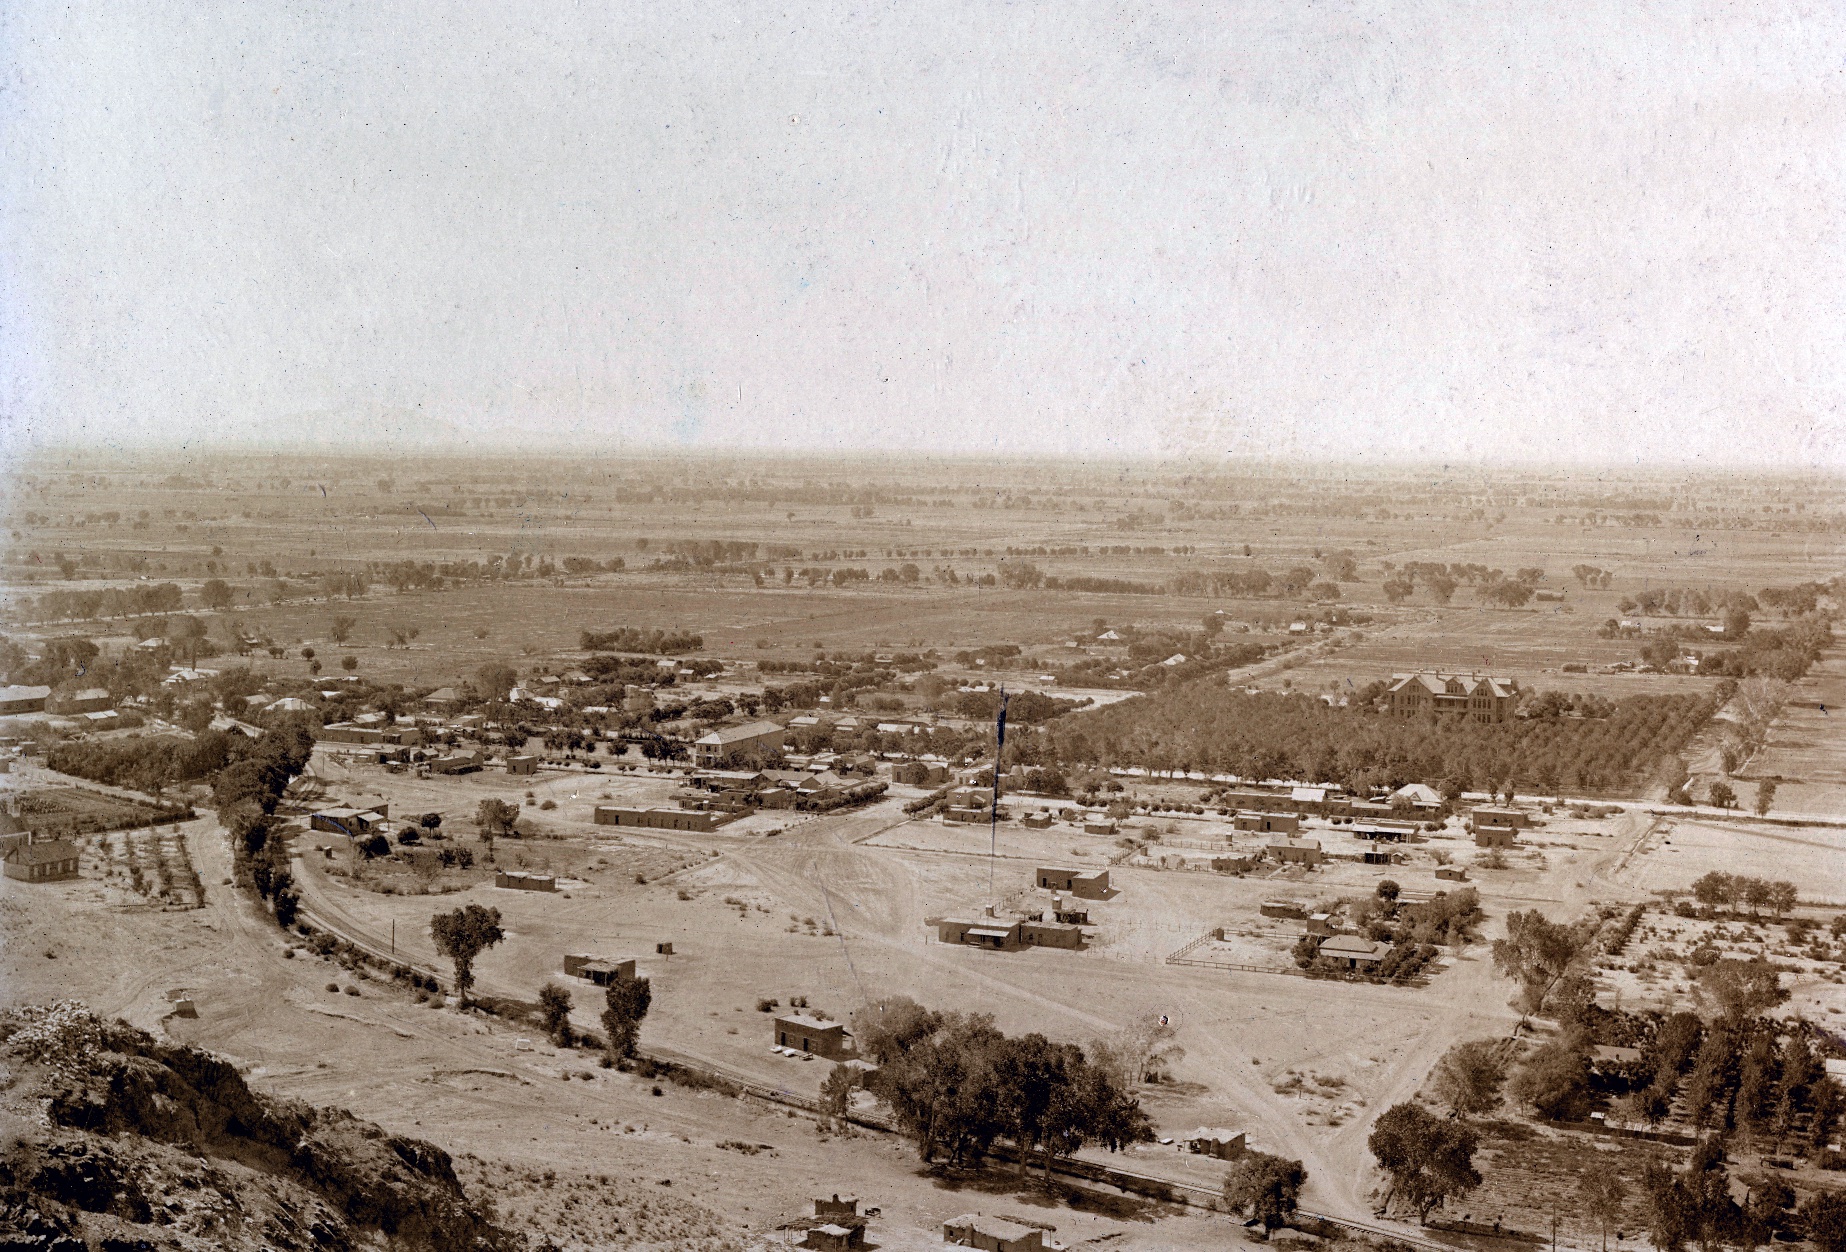 Image credit: Unknown photographer, “View of Tempe-Looking Southeast from Tempe Butte,” c. 1900. Borrowed from the Tempe Historical Museum (Donor: Hayden Family. Catalog number: 1987.1.210).